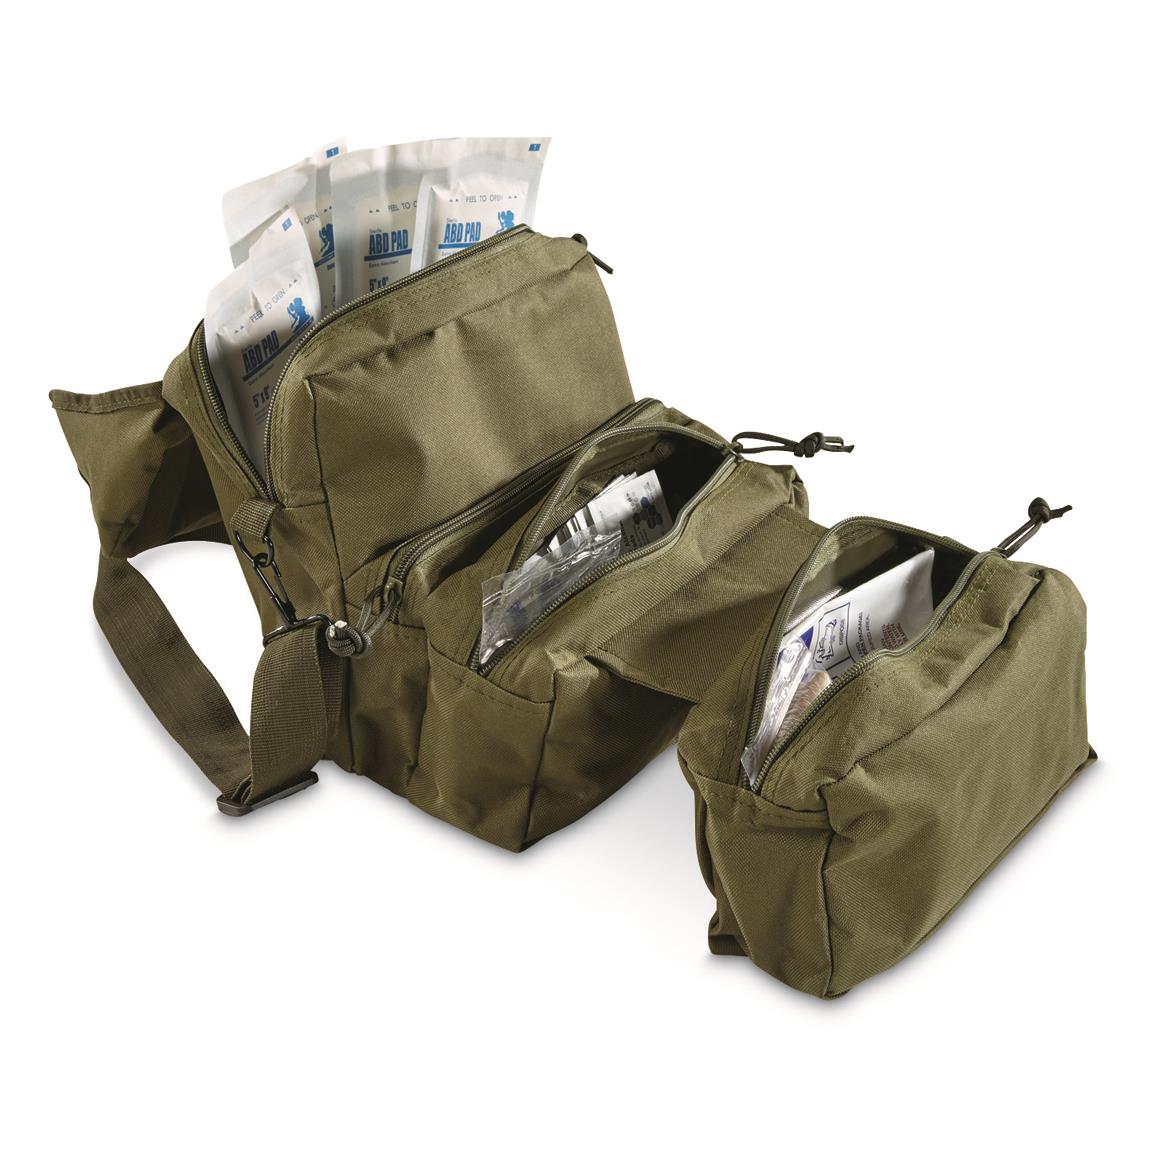 Triple pocket design loaded with supplies, Olive Drab